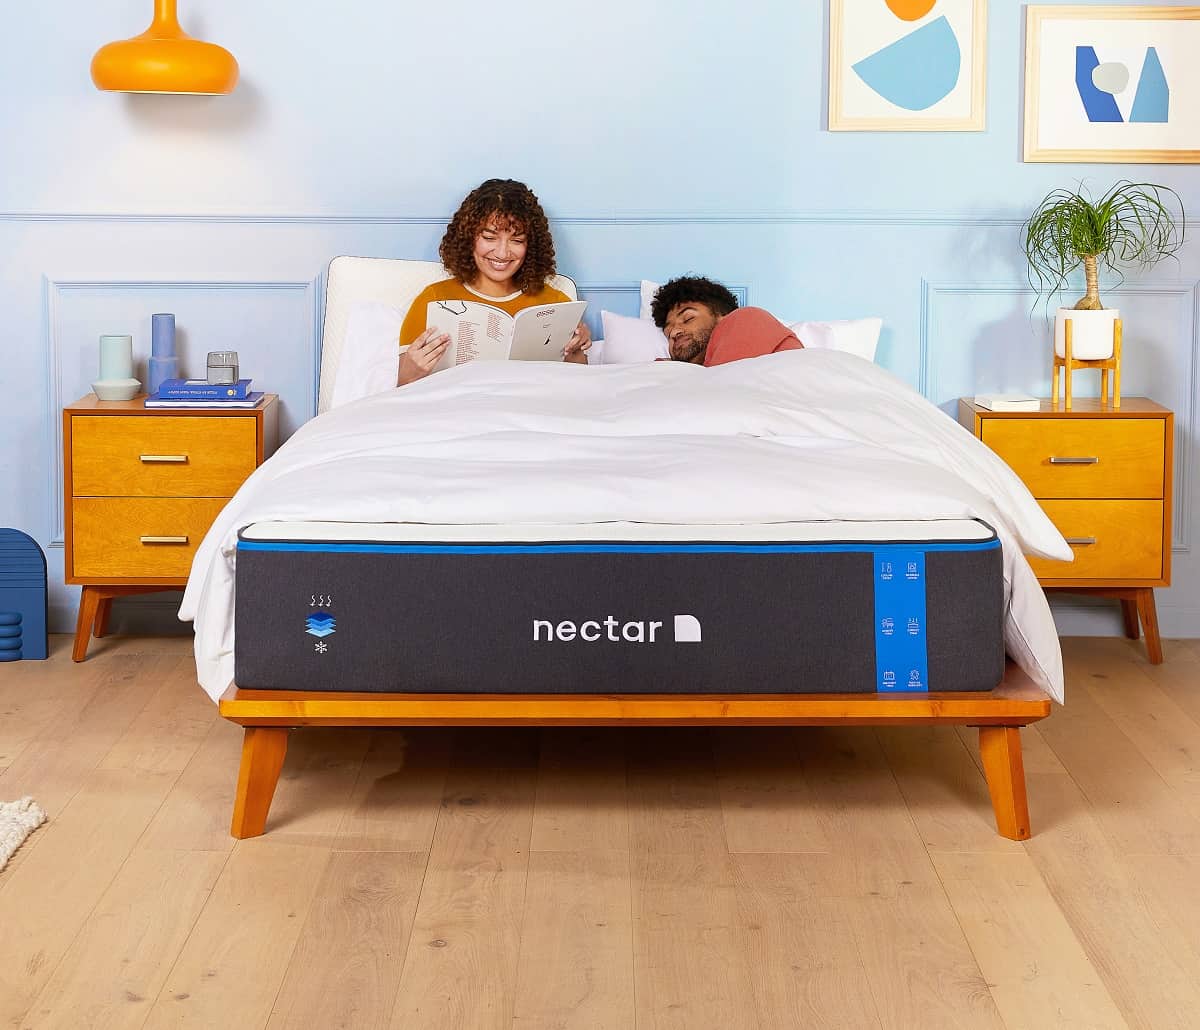 Nectar Mattress Review 2020 : Perfect For Side Sleeper And Couples ...